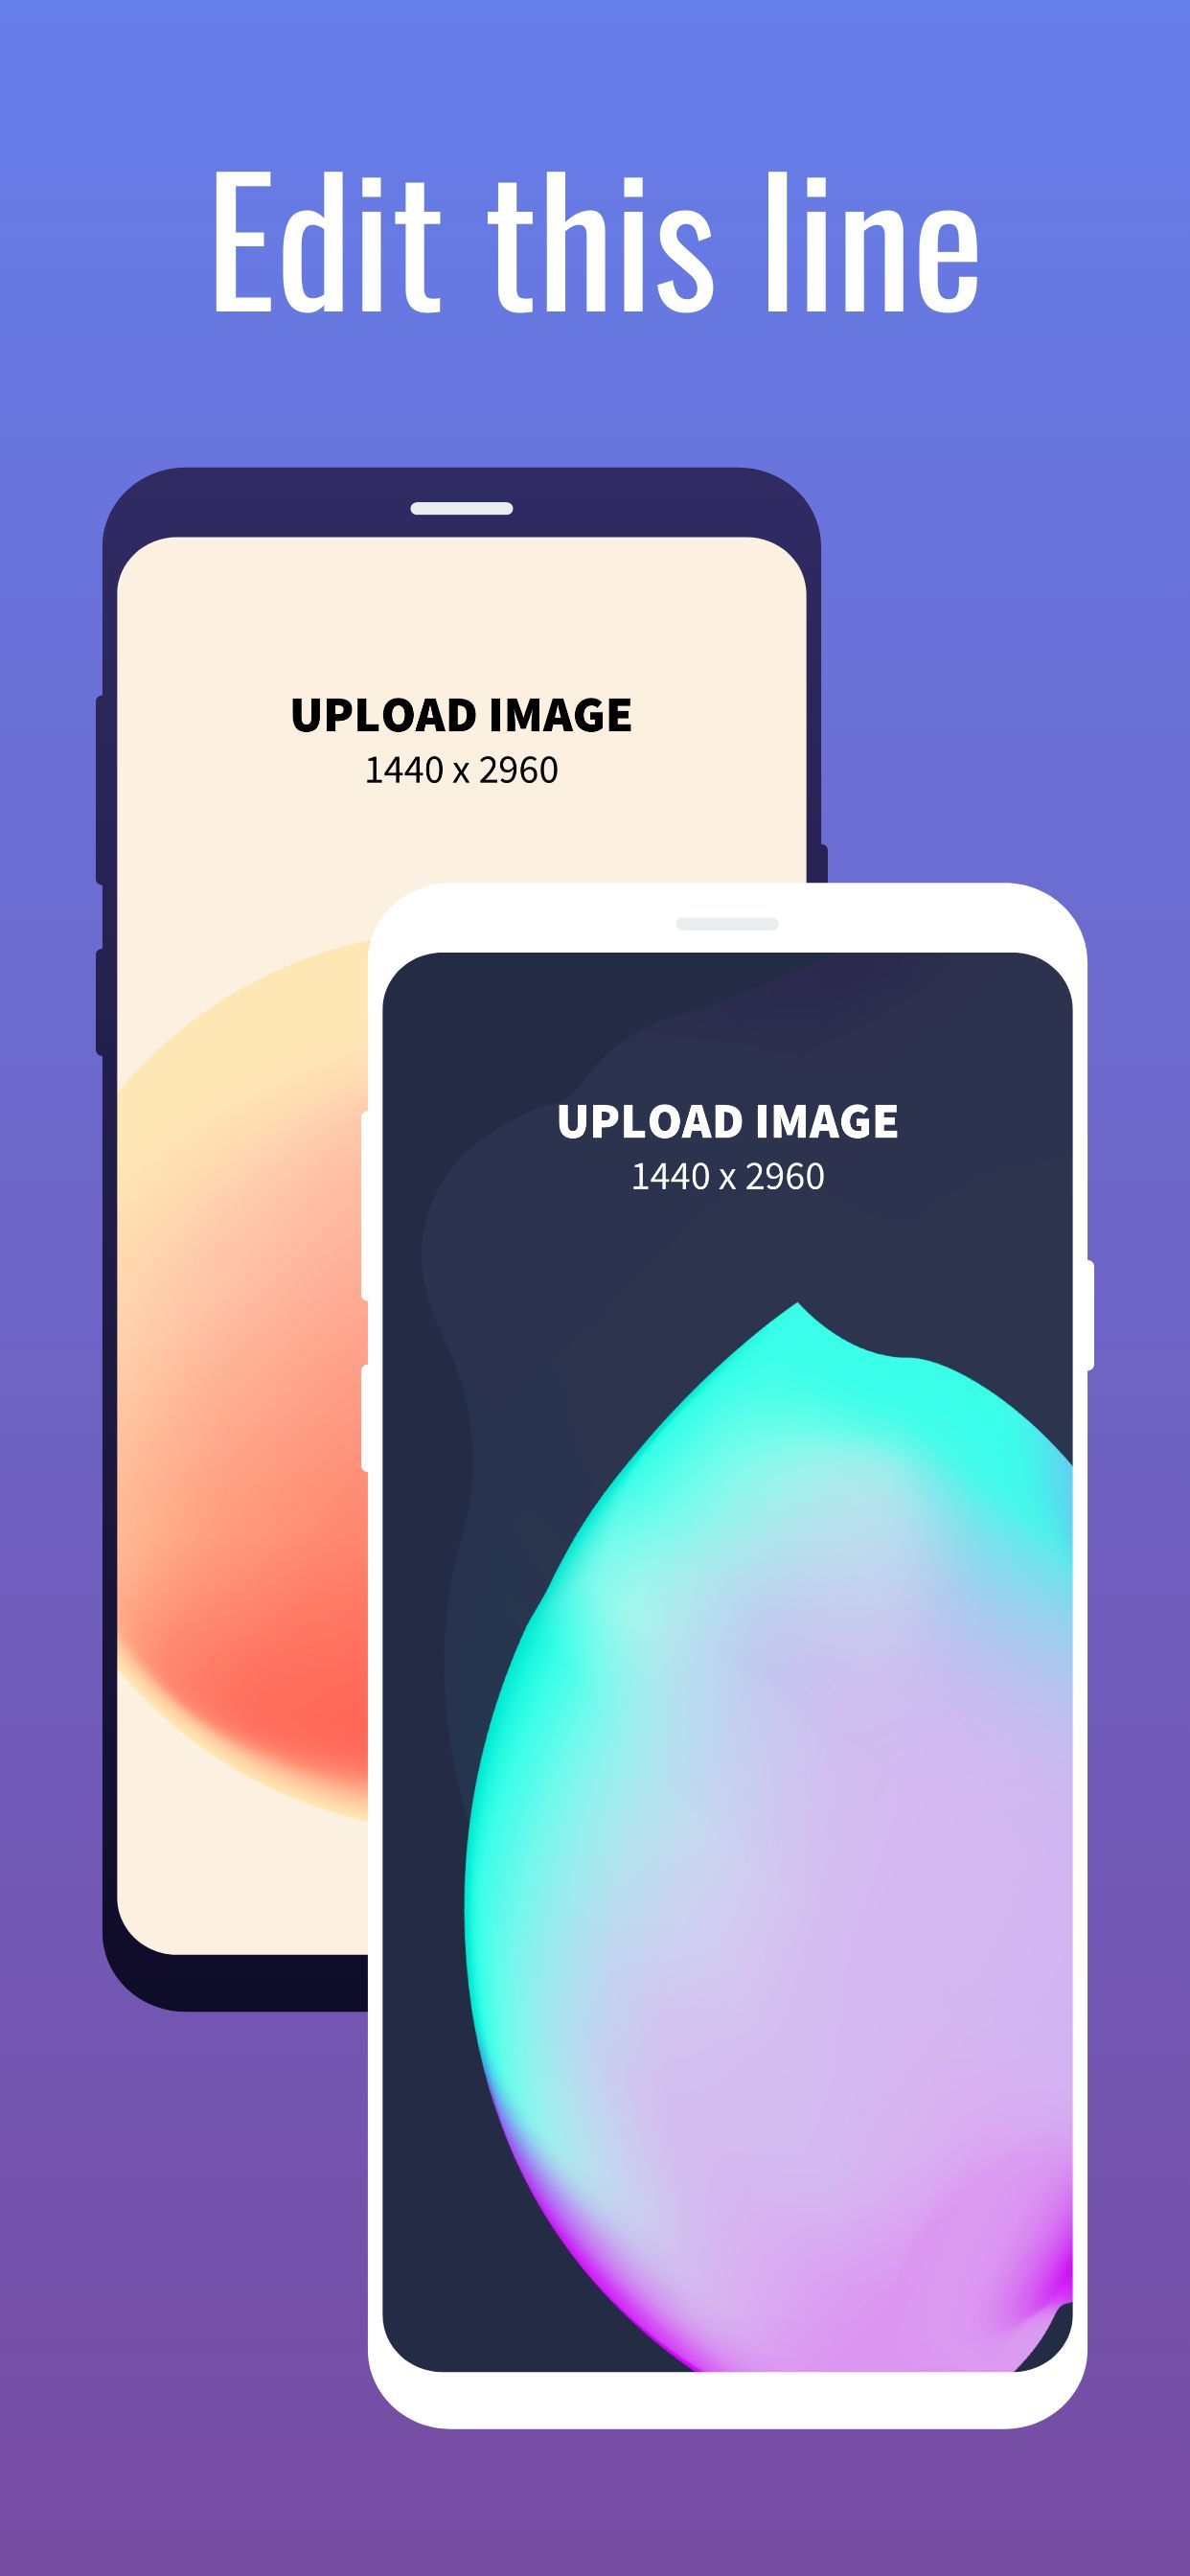 Samsung S9 Screenshot 6 template. Quickly edit fonts, text, colors, and more for free.